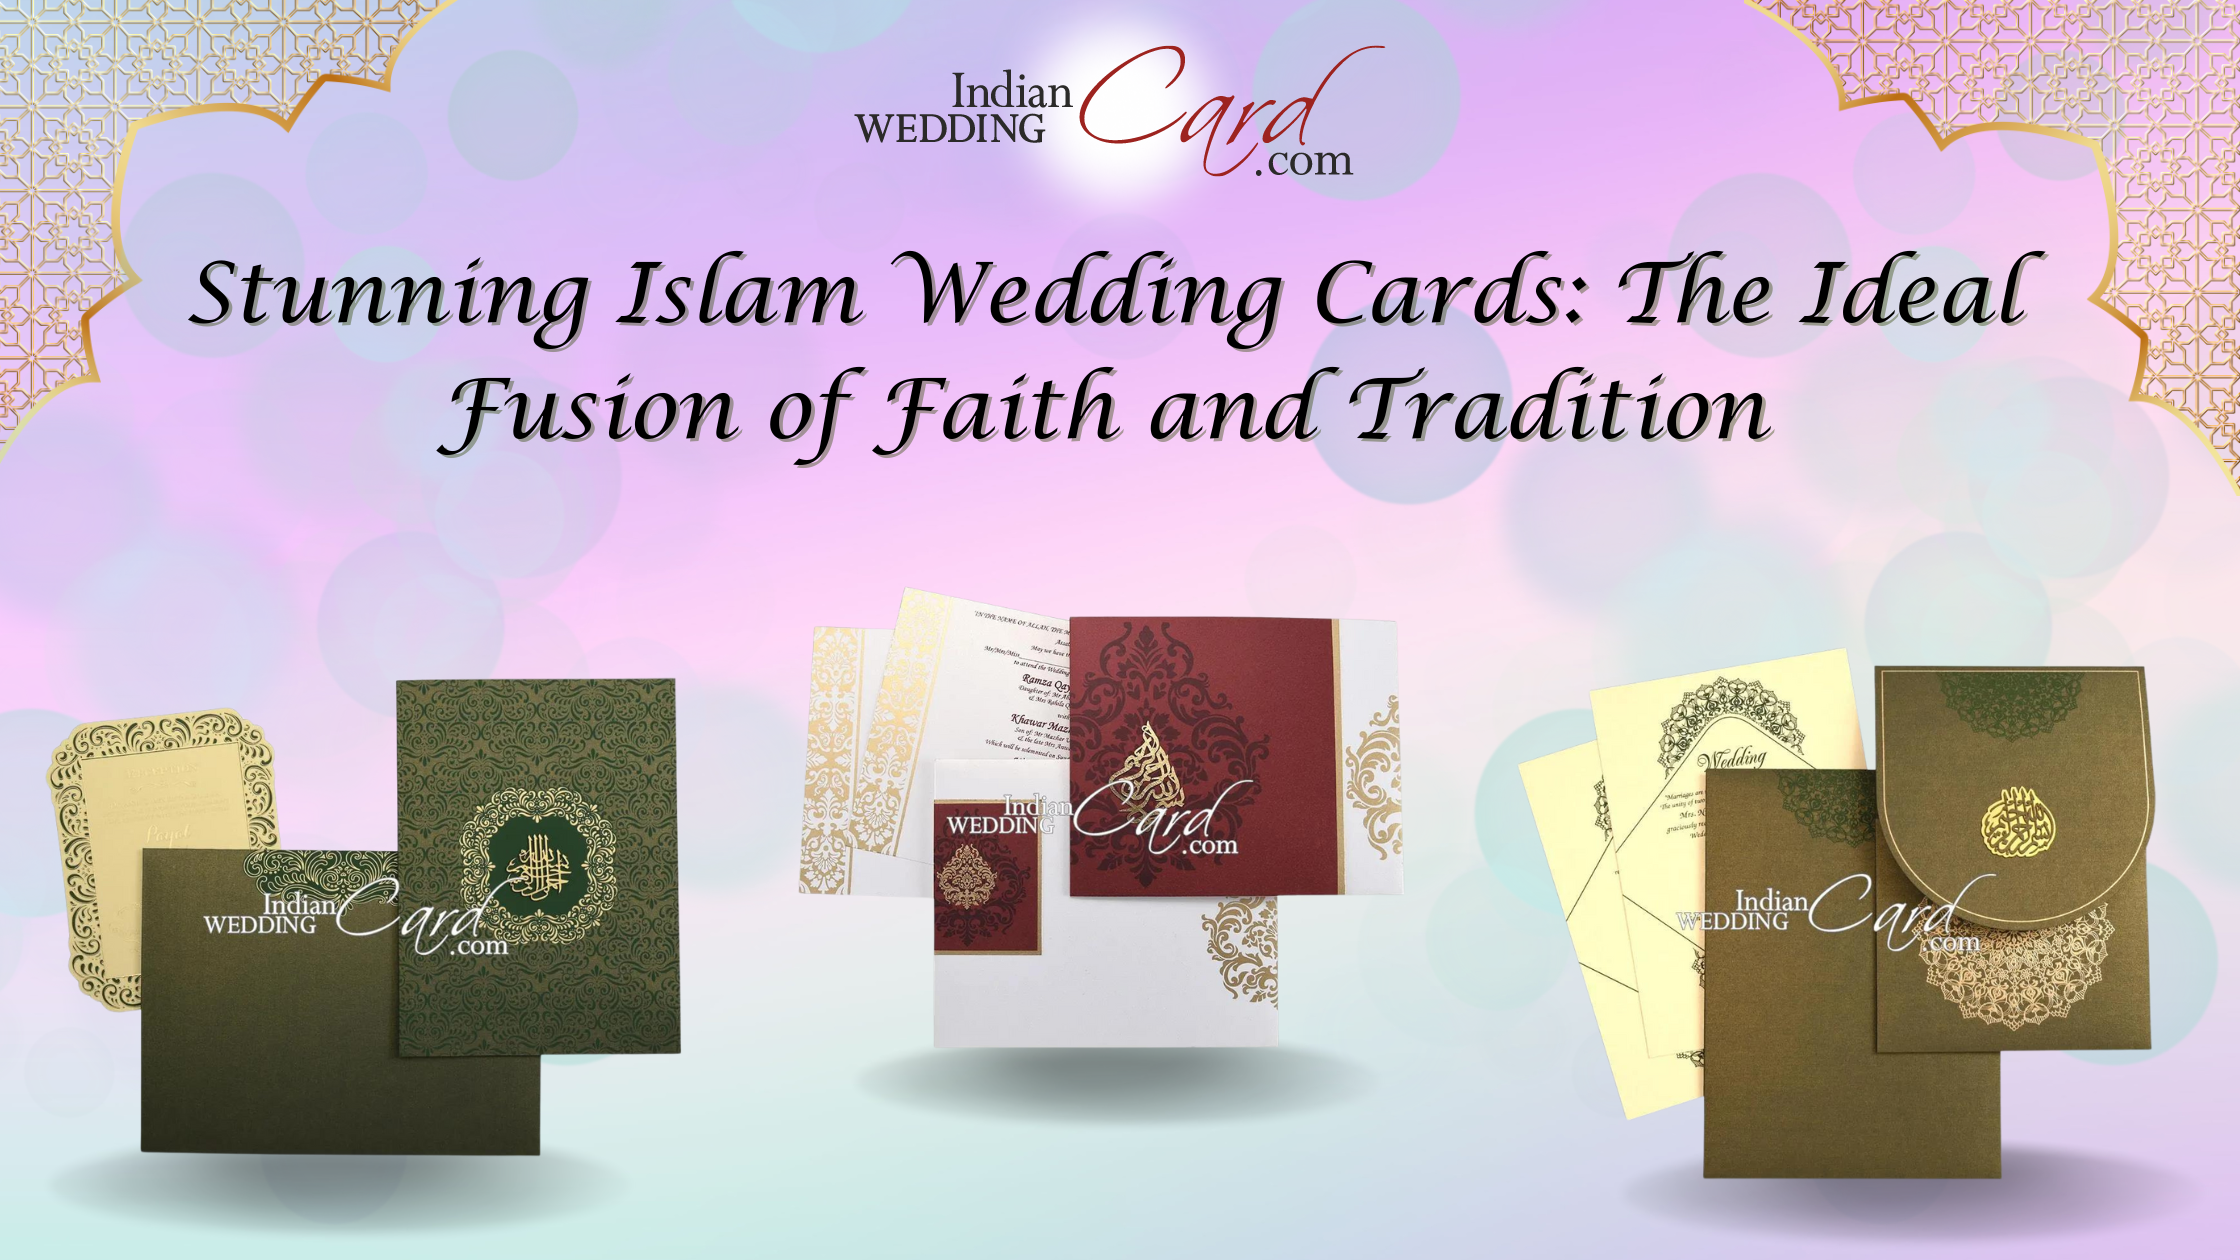 Stunning Islam Wedding Cards: The Ideal Fusion of Faith and Tradition